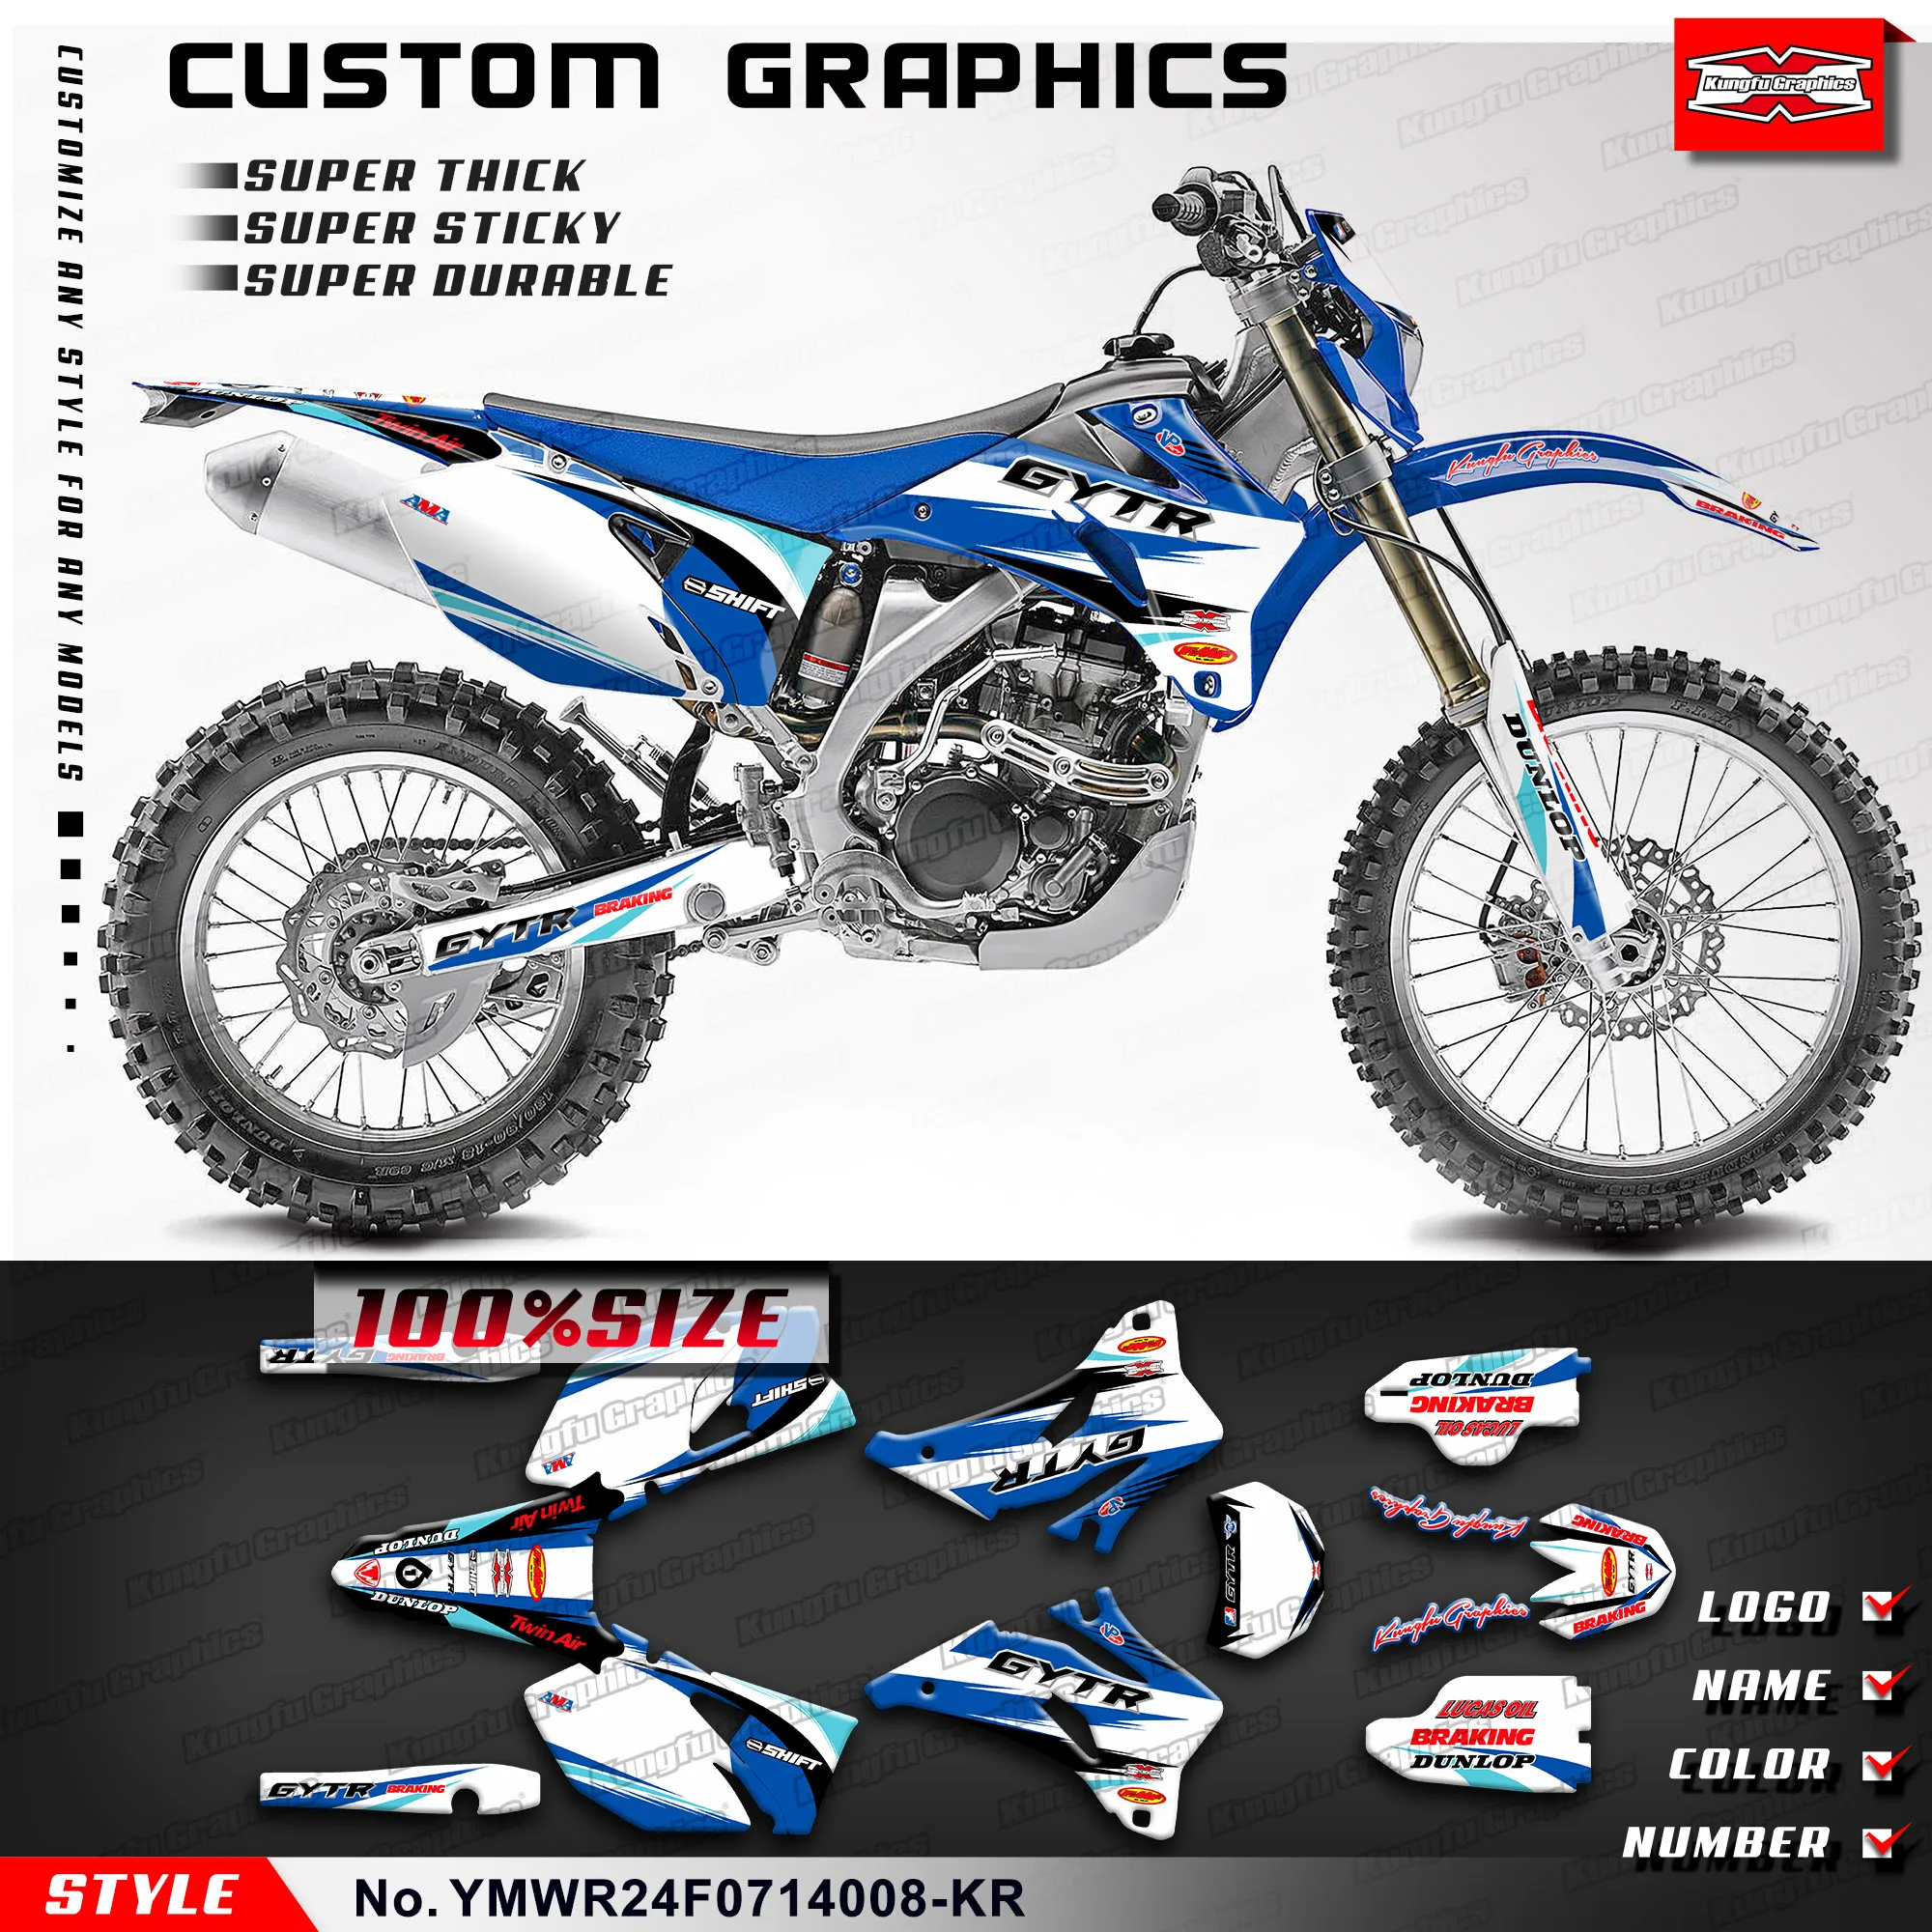 KUNGFU GRAPHICS MX Stickers Decal Kit for Yamaha WR 250F 450F WR250F WR450F 2007 2008 2009 2010 2011 2012 2013 2014, White Blue dsmtech motorcycle decal stickers graphics kit for kawasaki kx85 1998 2003 2004 2005 2006 2007 2008 2009 2010 2011 2012 2013